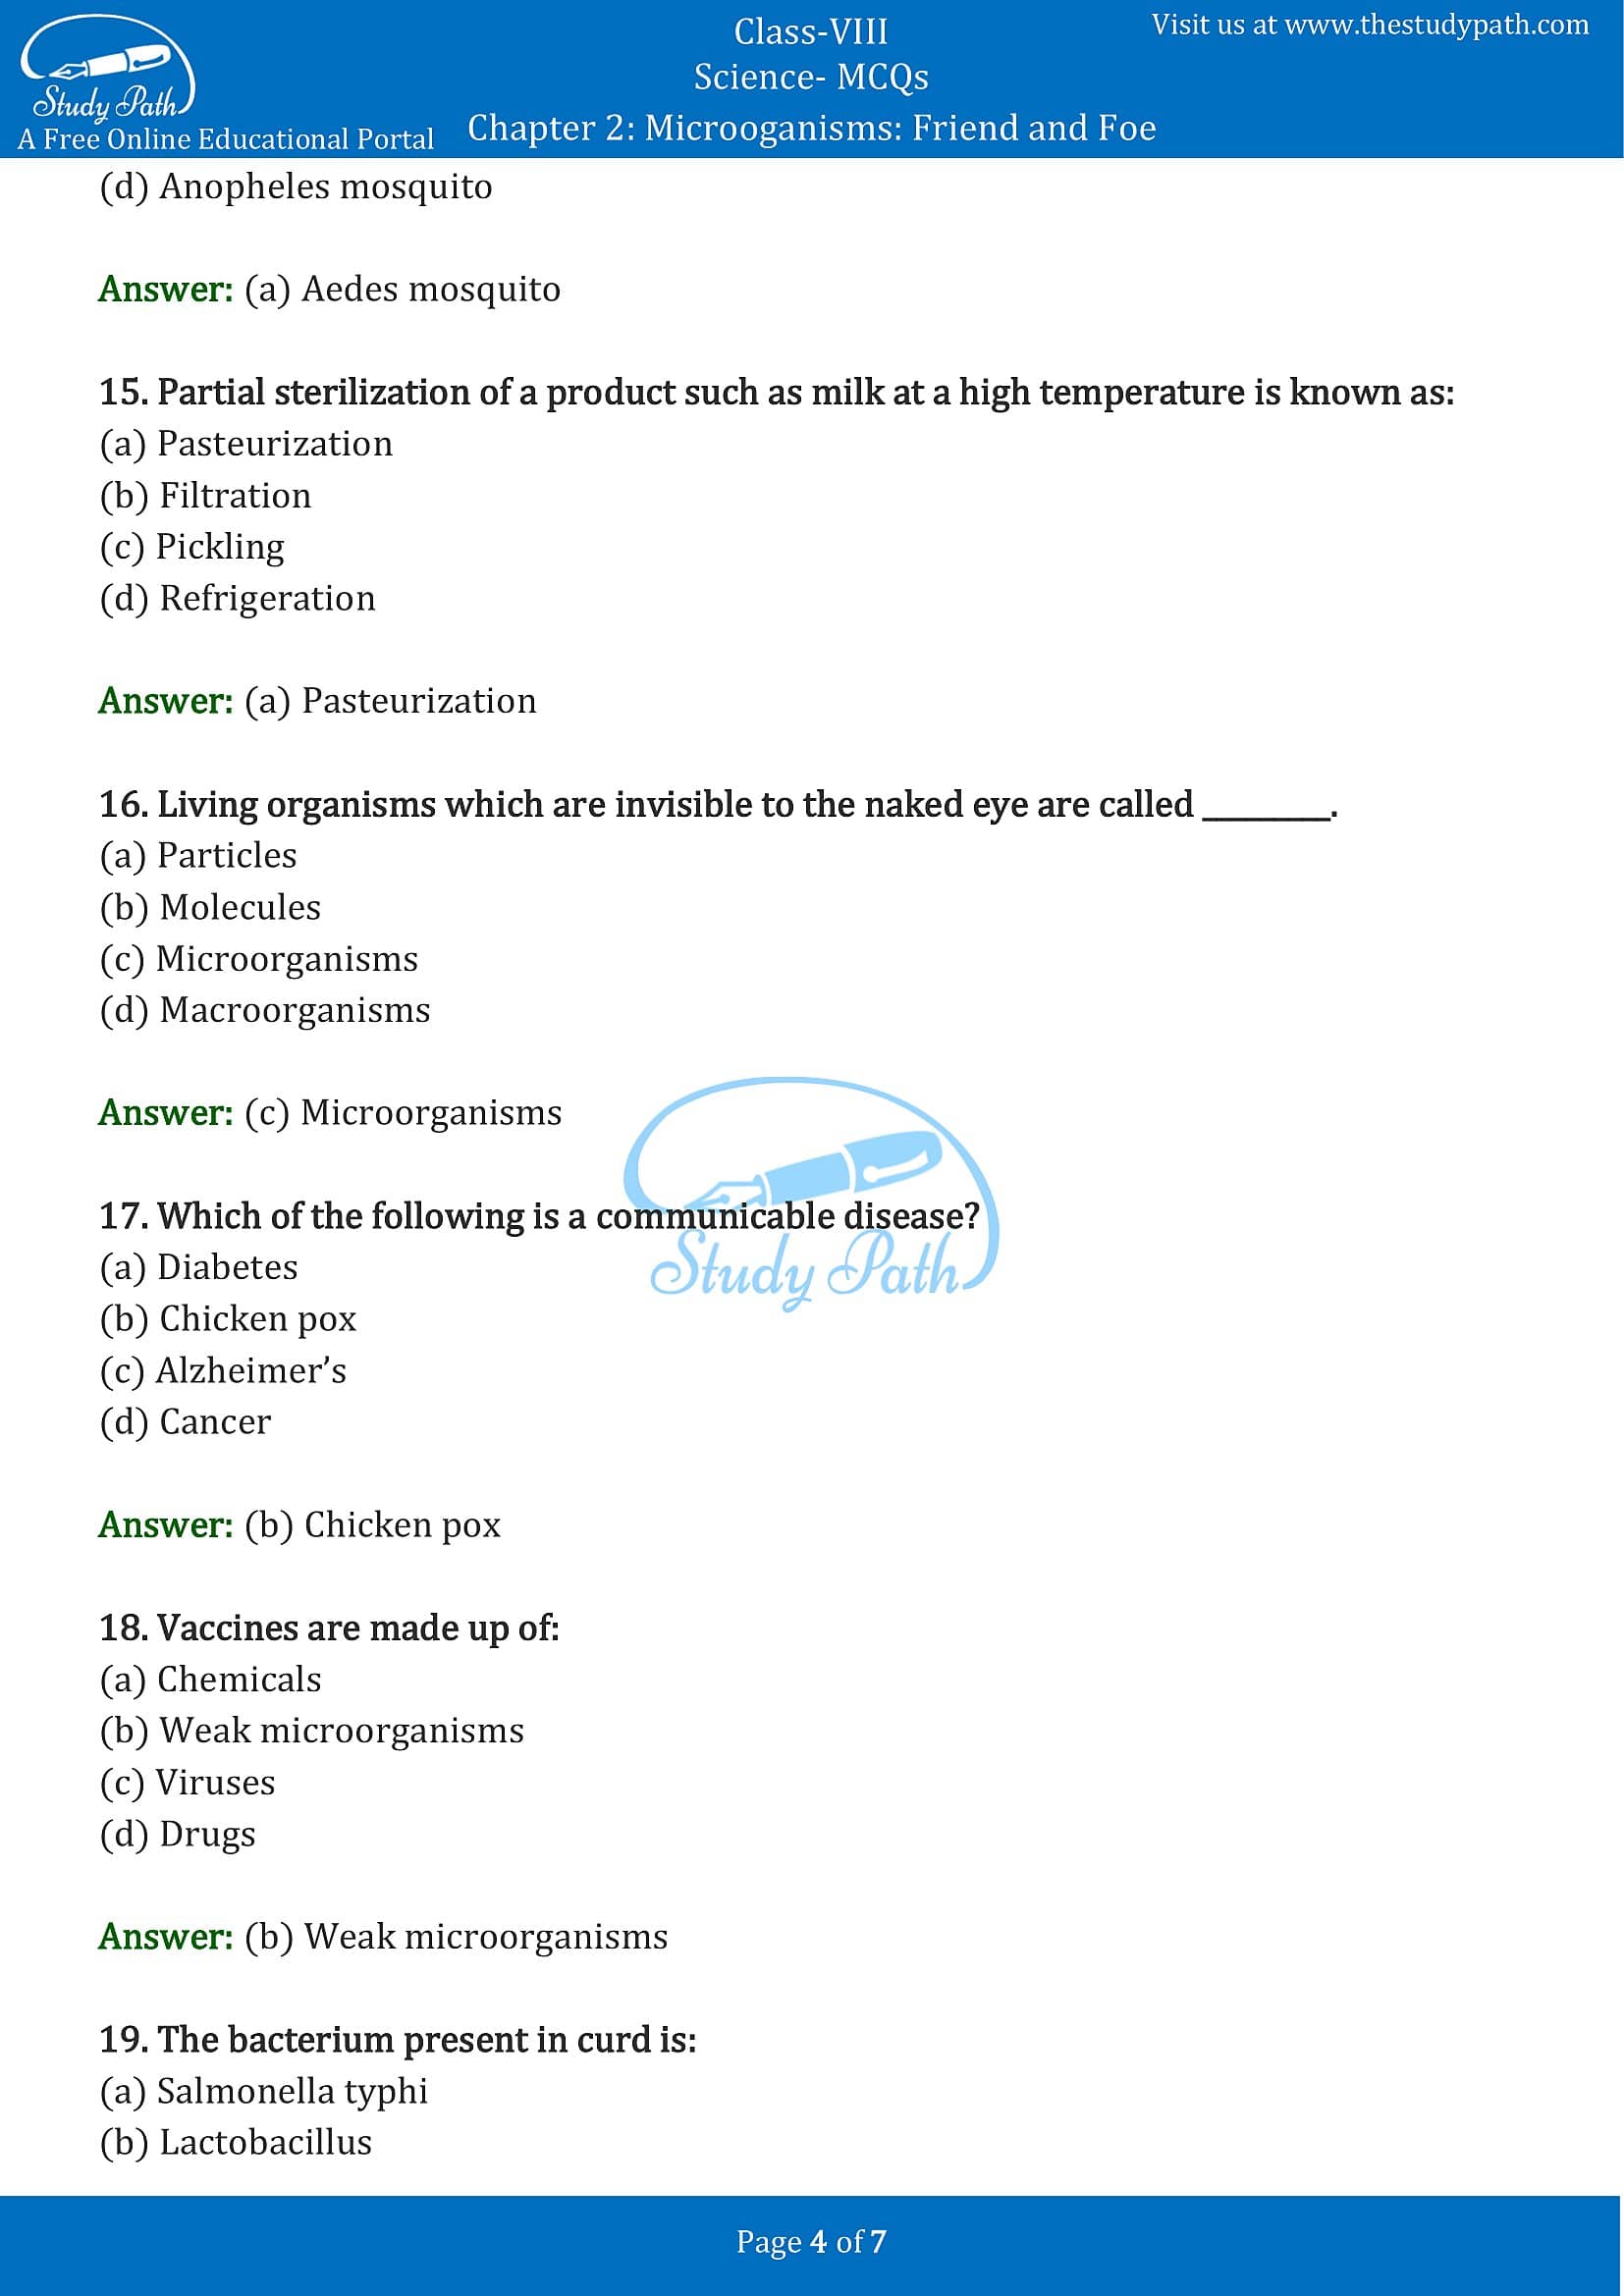 MCQ Questions for Class 8 Science Chapter 2 Microoganisms Friend and Foe with Answers PDF -4